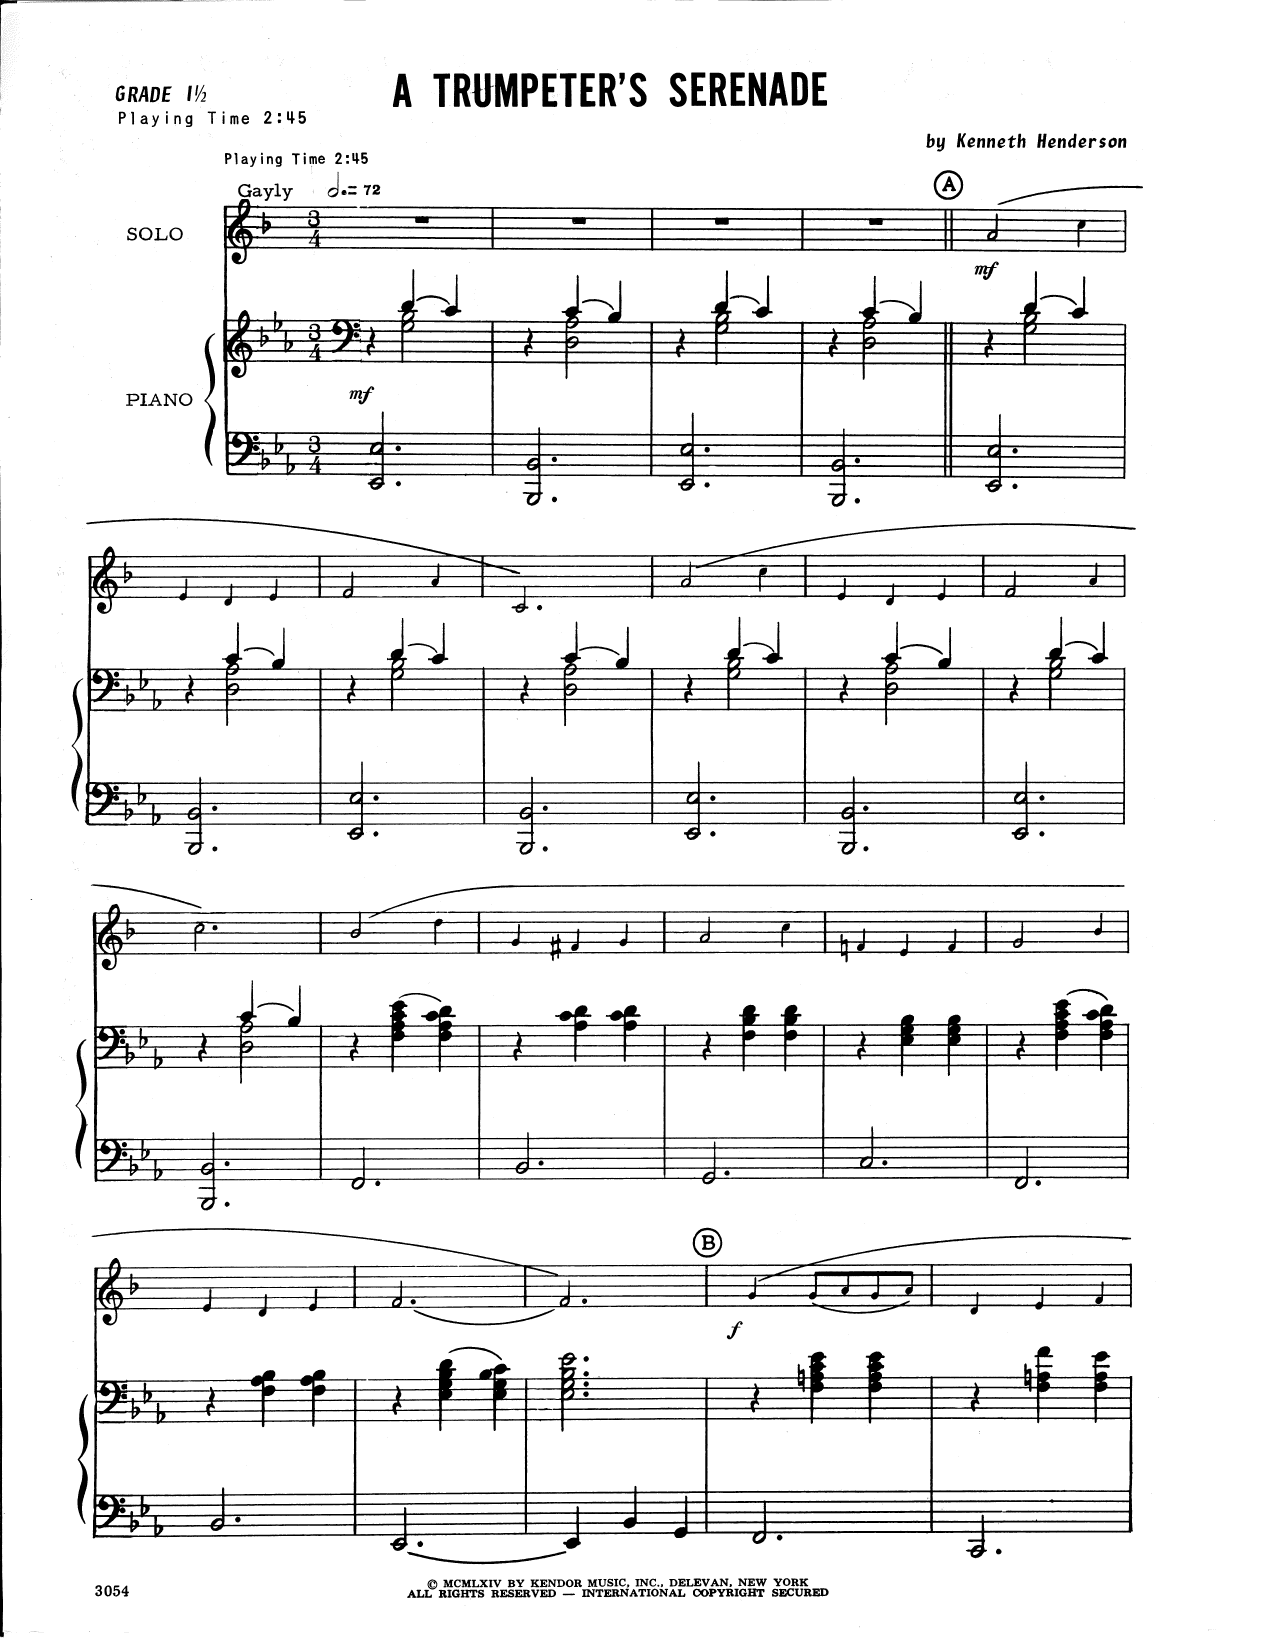 Download Kenneth Henderson A Trumpeter's Serenade - Piano Accompan Sheet Music